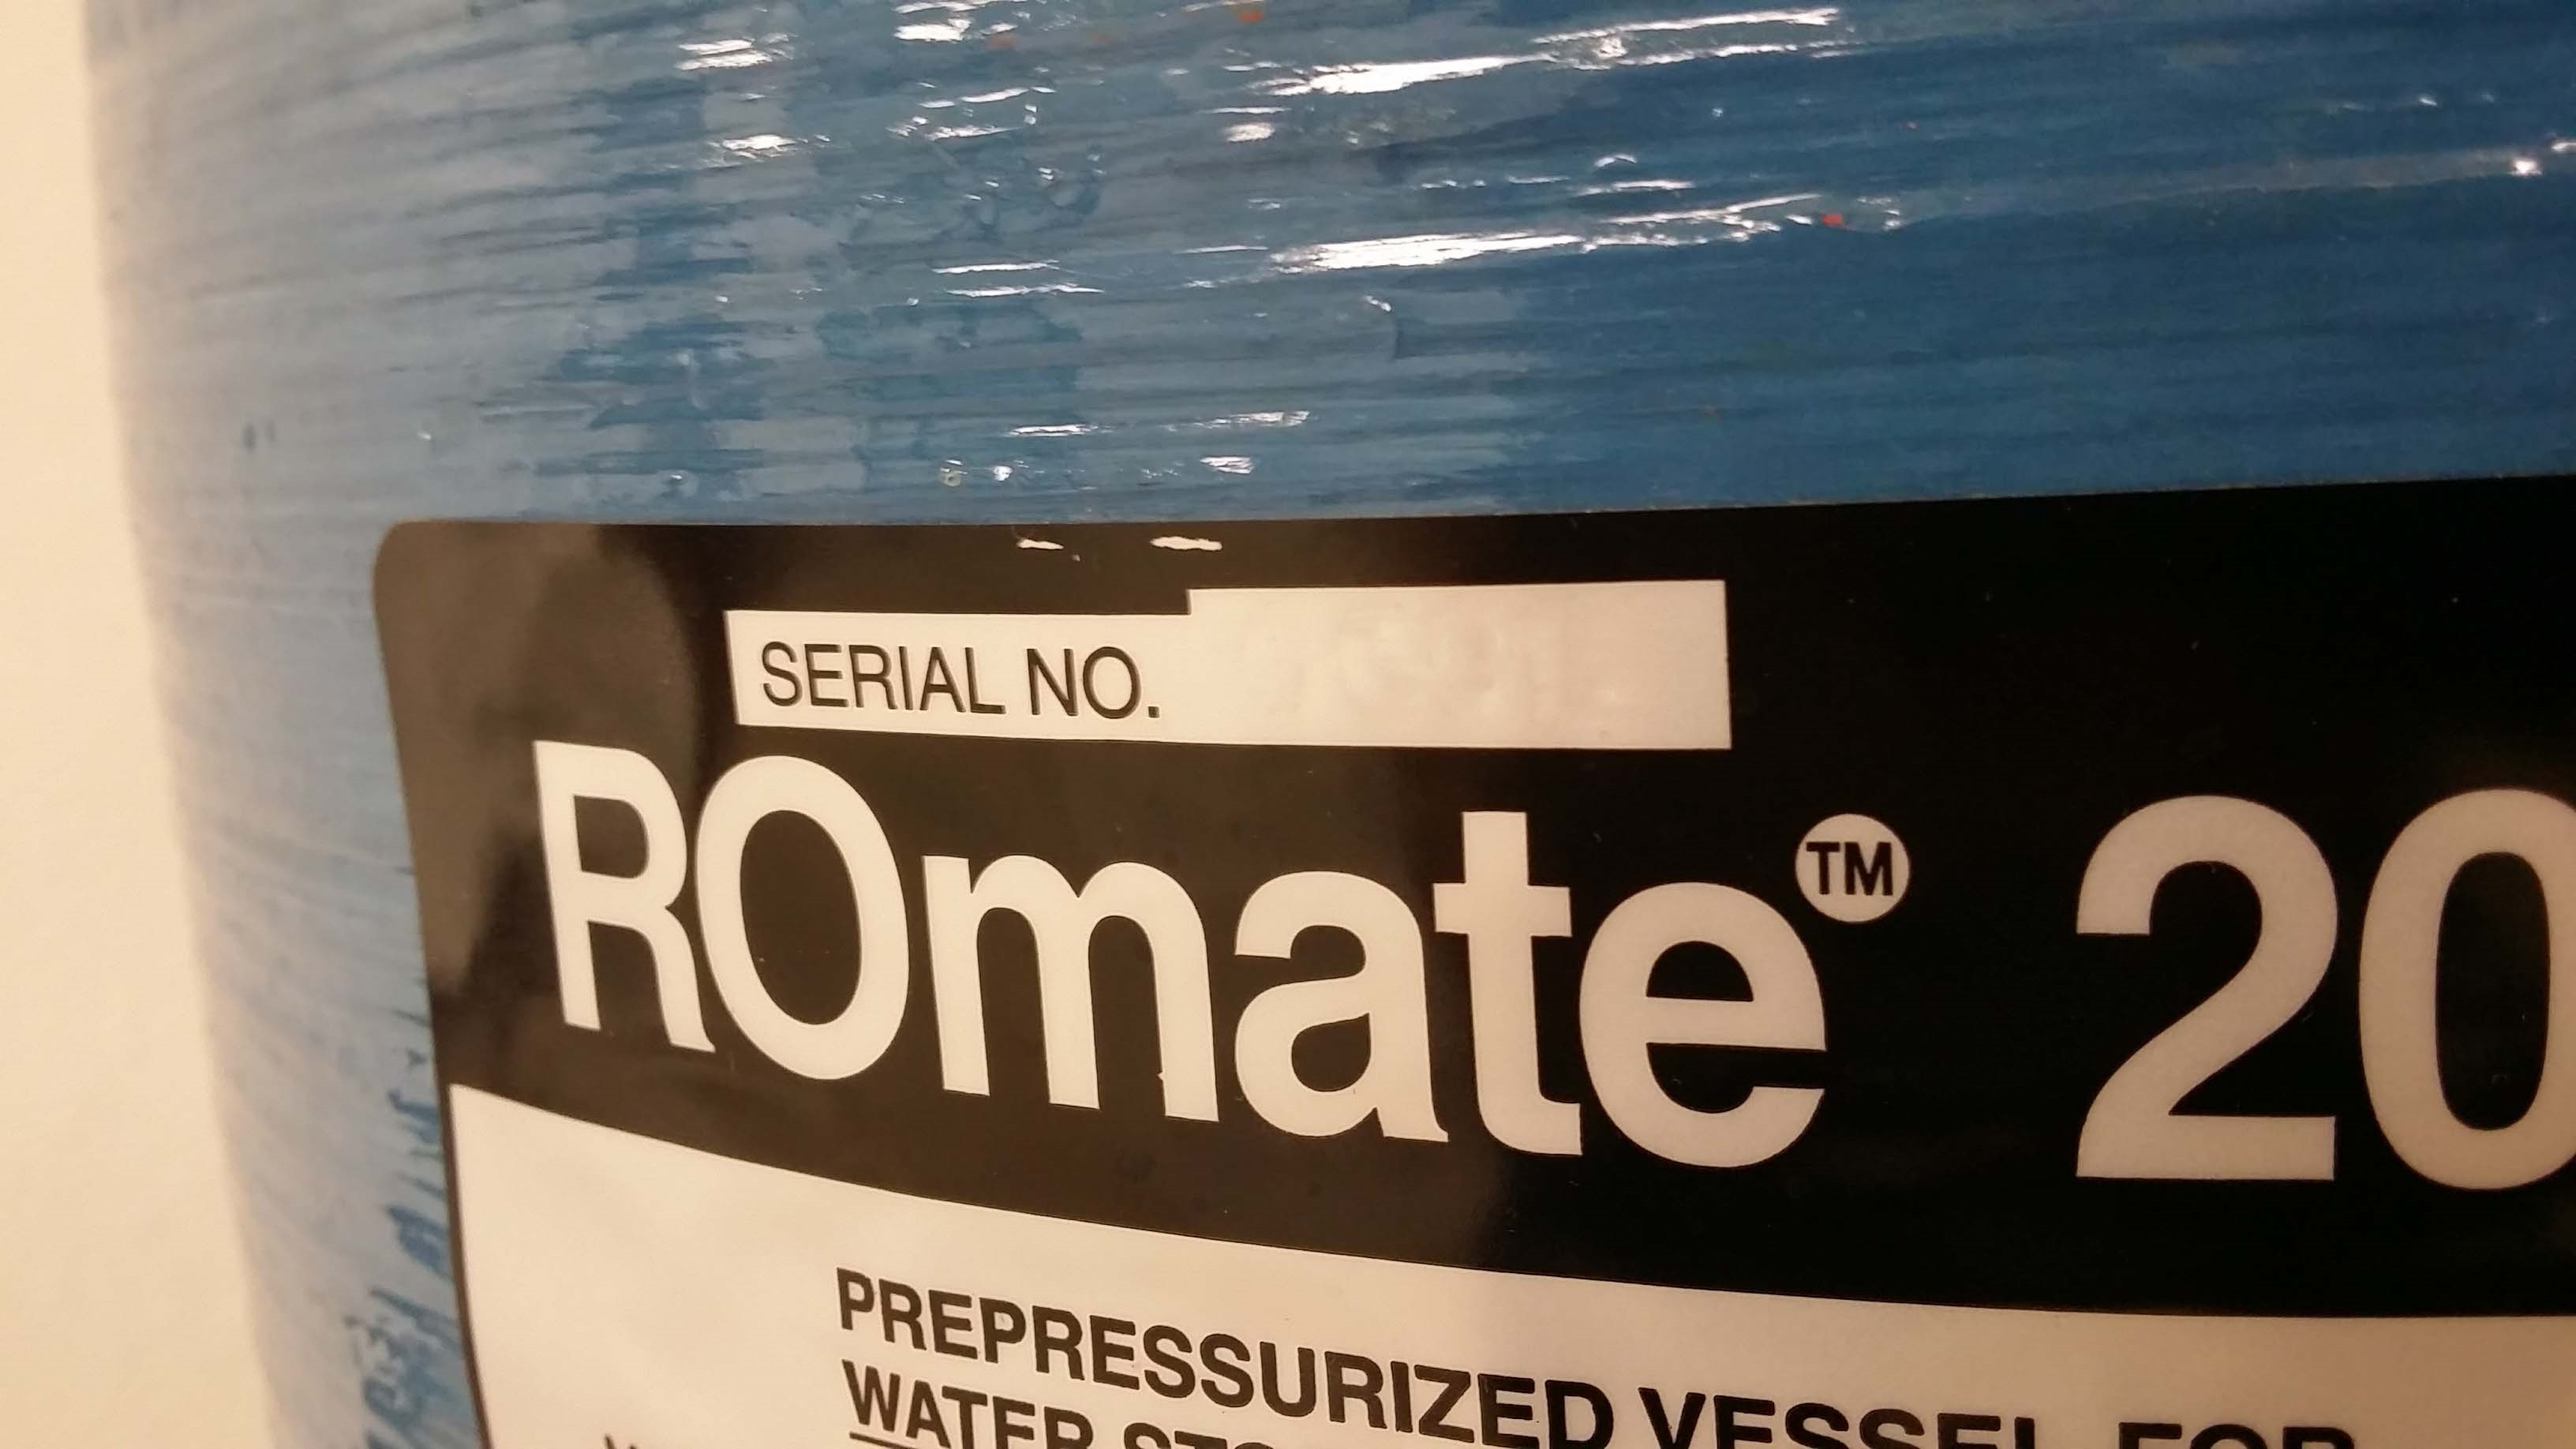 Photo Used PENTAIR WATER ROmate 20 For Sale